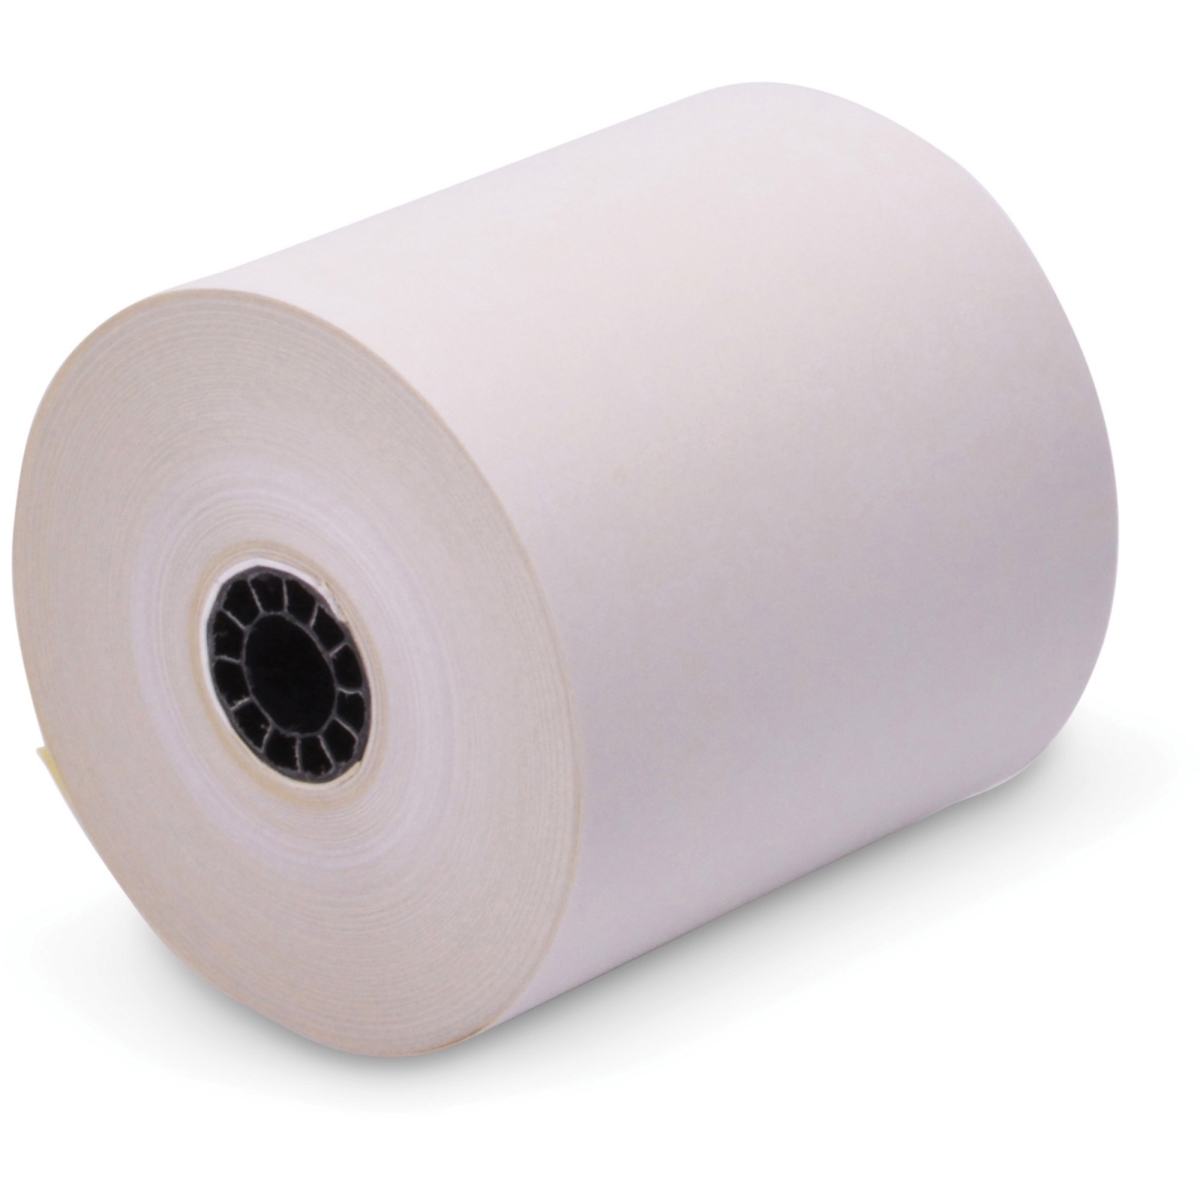 Iconex Icx90770060 3 Ply Carbonless Paper Roll, White & Yellow